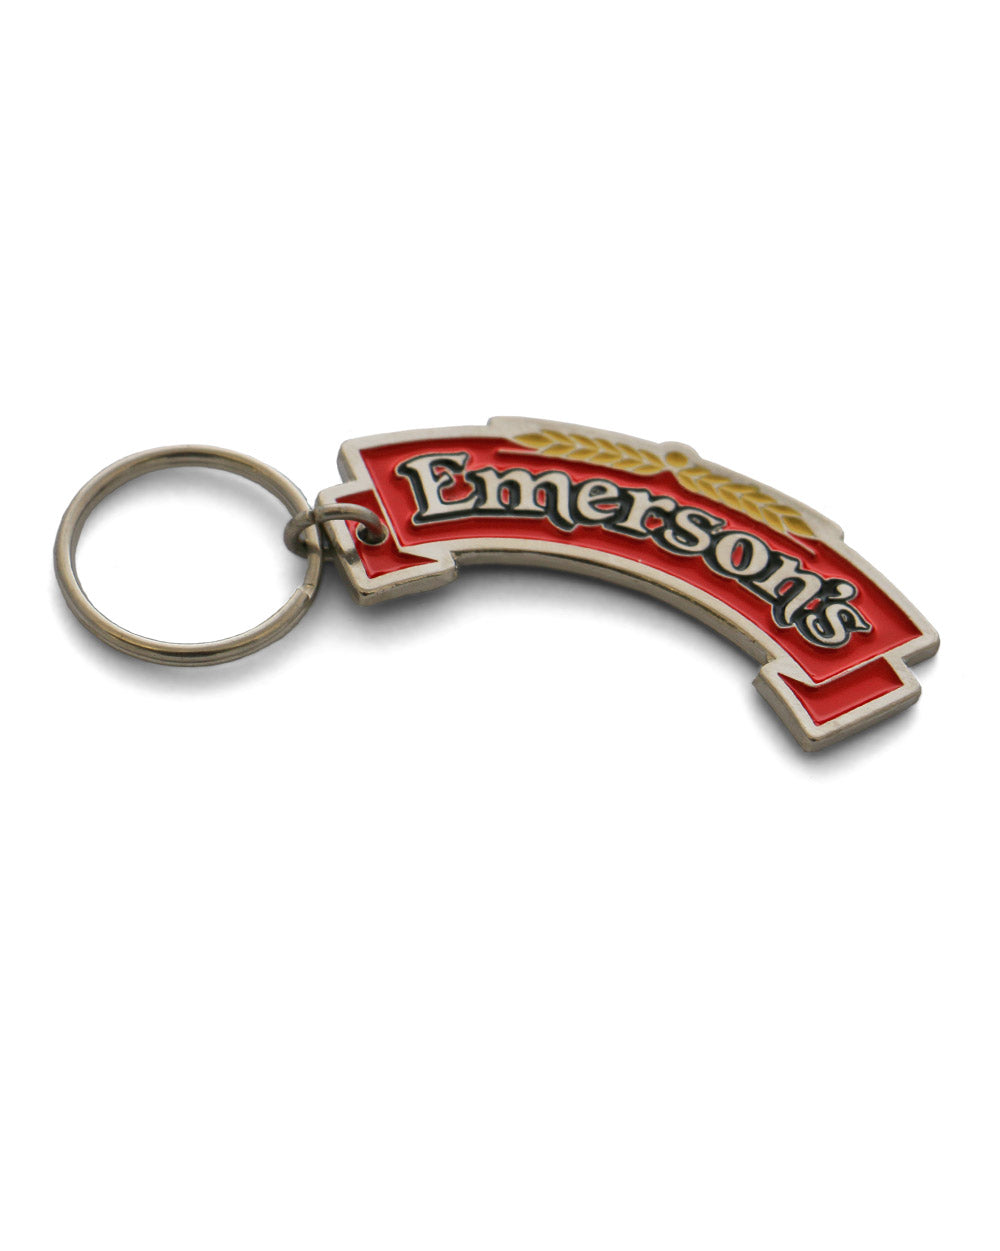 Emerson's Keyring -  Beer Gear Apparel & Merchandise - speights - lion red - vb - tokyo dry merch